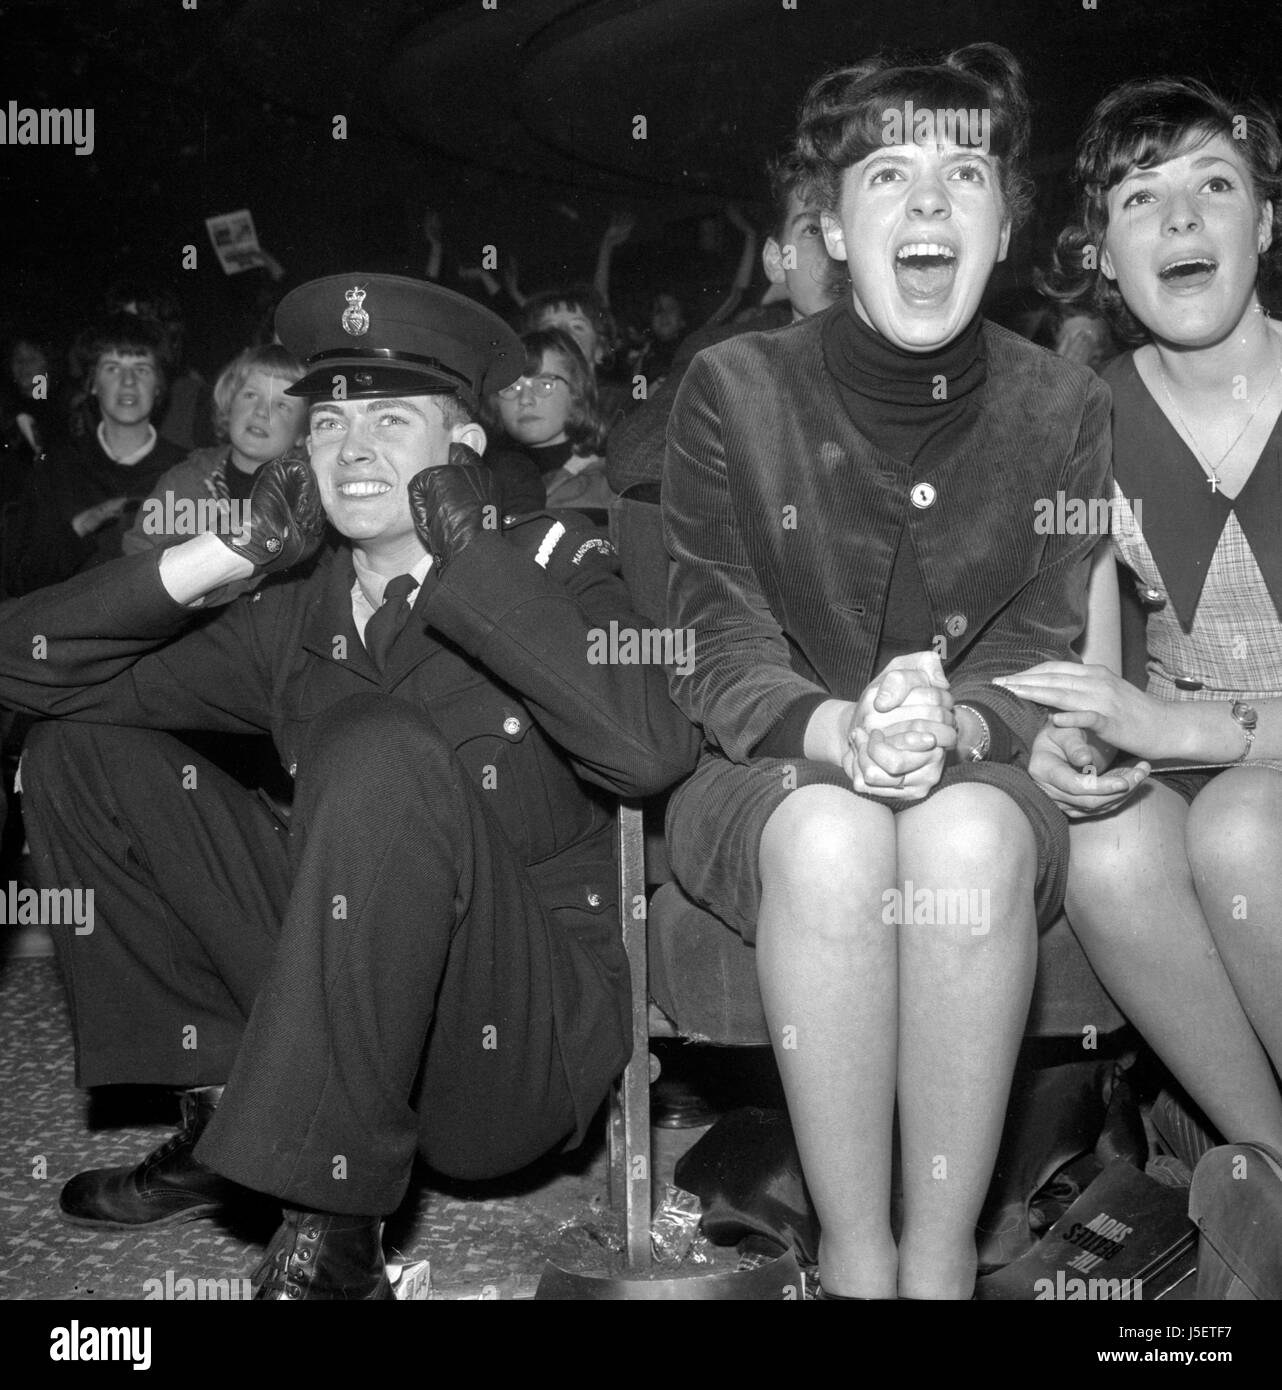 Screaming fans forces a policeman to take evasive action during the Beatles performance in Manchester. Stock Photo